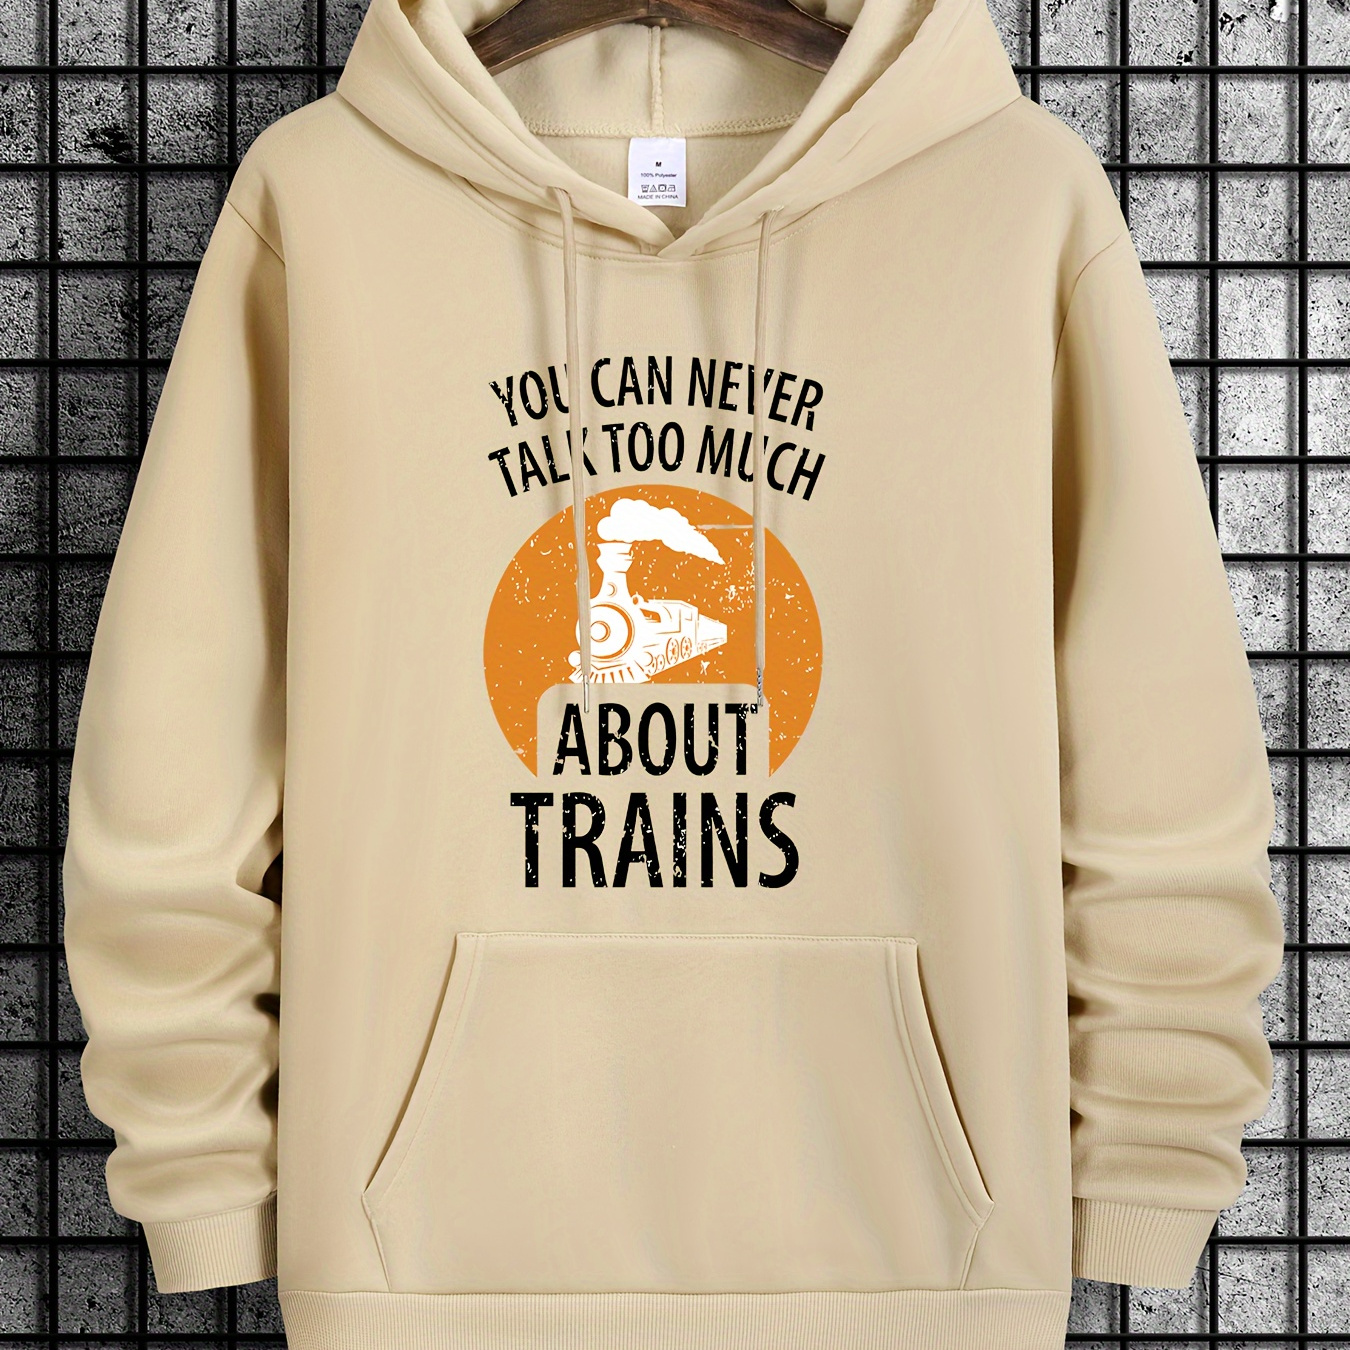 

You Can Never Talk Too Much About Trains Print Hoodie, Cool Hoodies For Men, Men's Casual Graphic Design Pullover Hooded Sweatshirt With Kangaroo Pocket Streetwear For Winter Fall, As Gifts